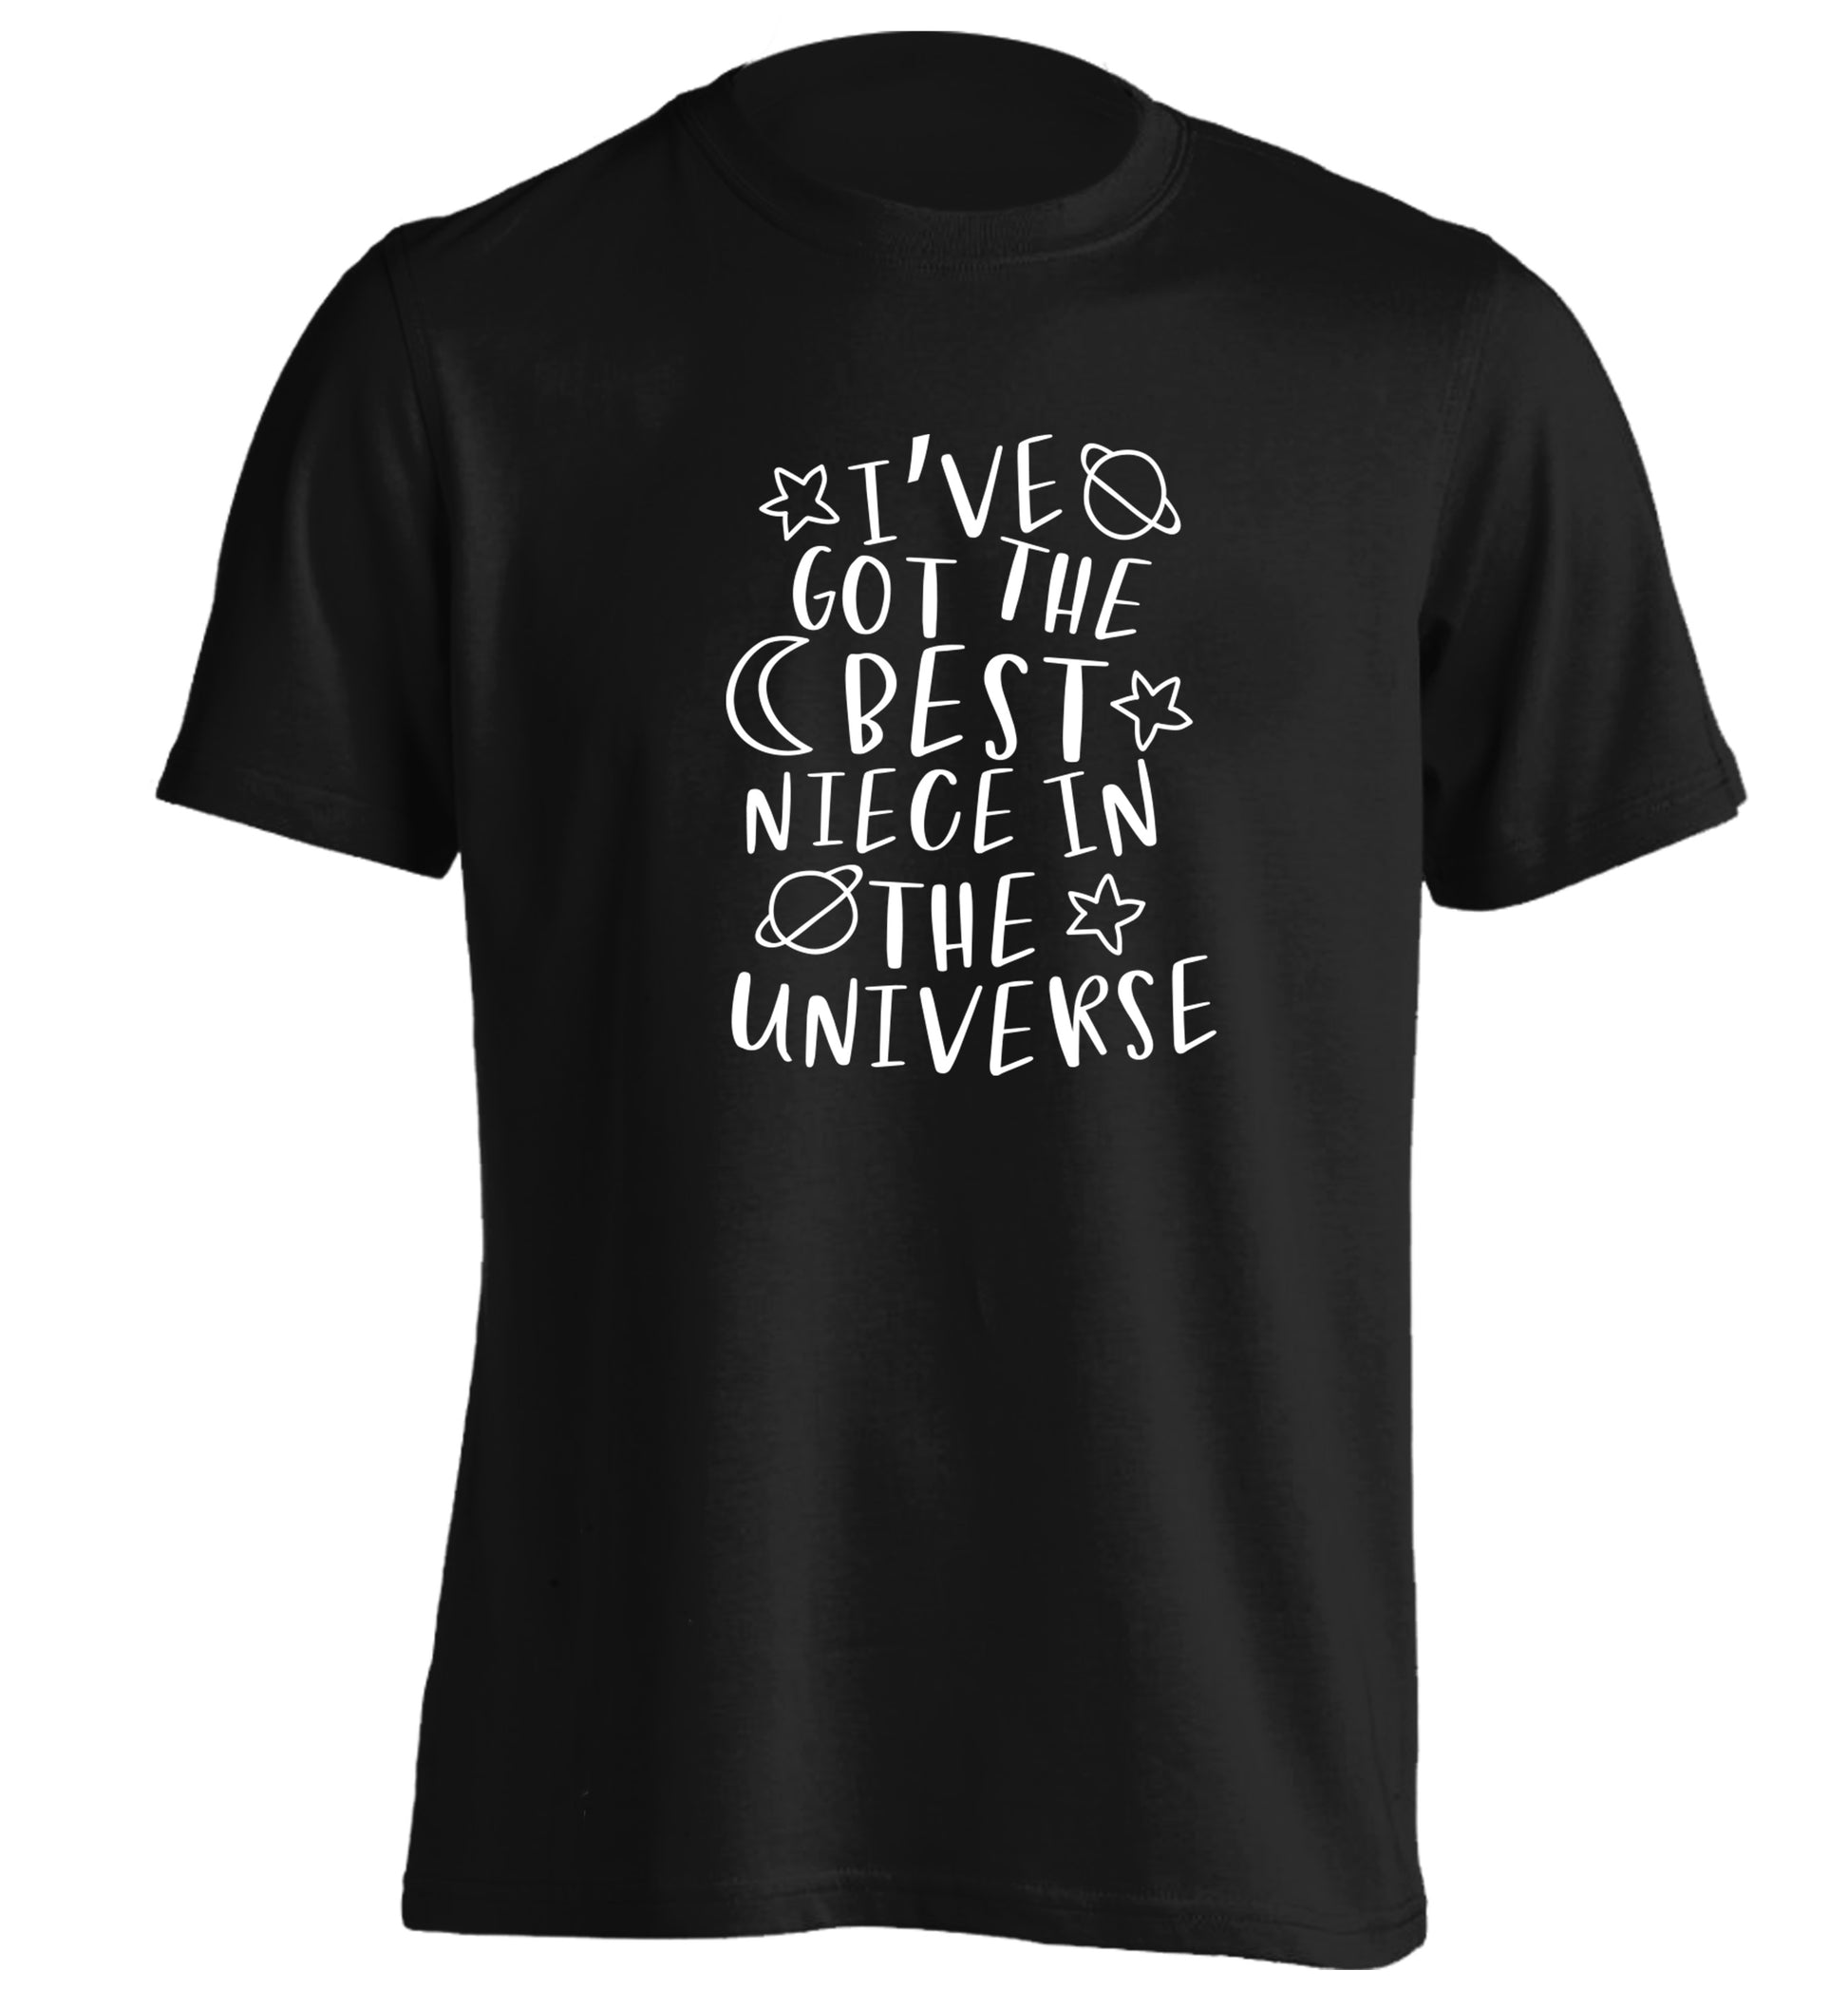 I've got the best niece in the universe adults unisex black Tshirt 2XL